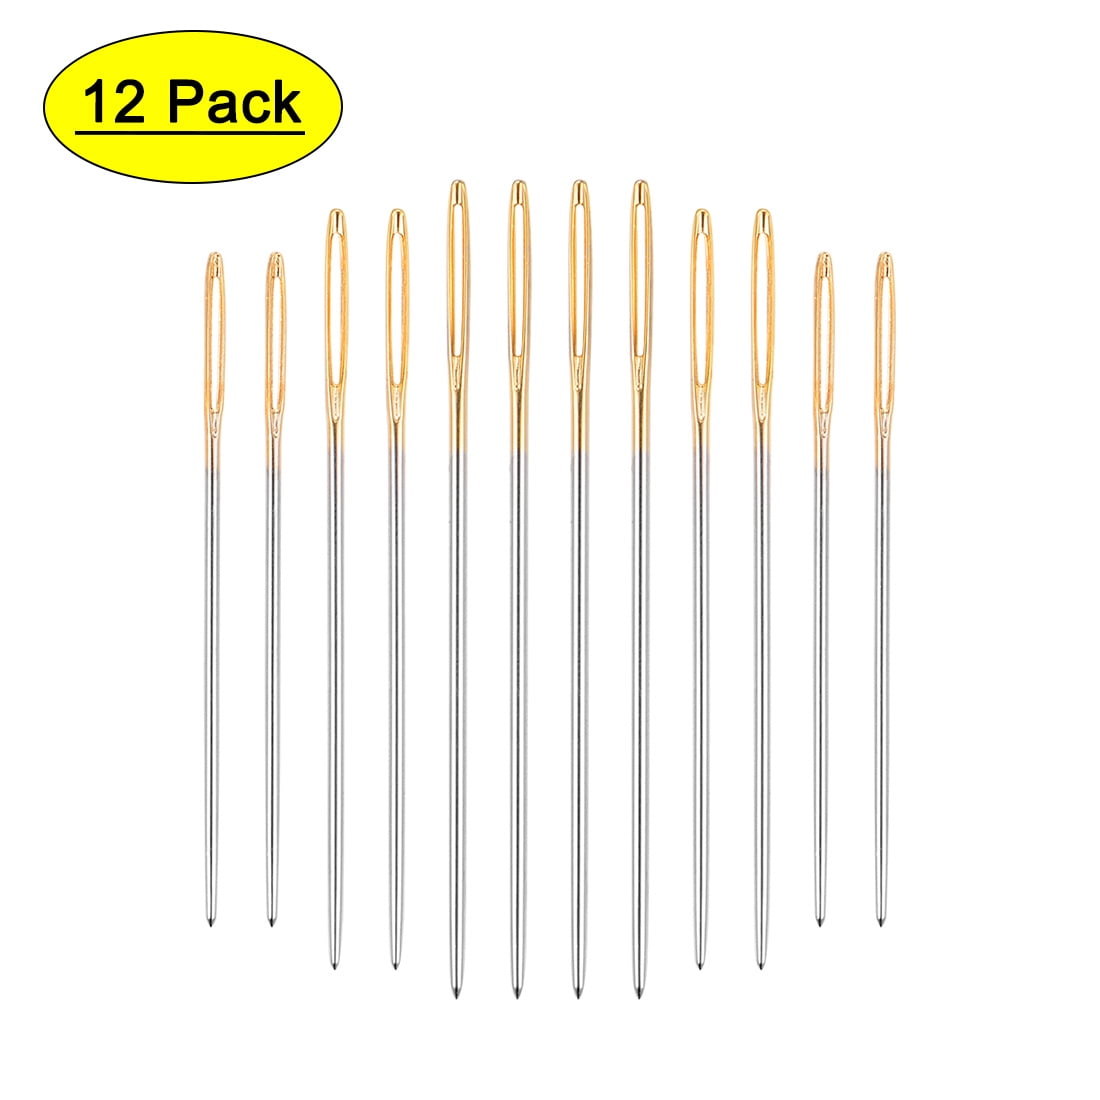 Uxcell Large-Eye Hand Sewing Needles - 3 Sizes with 2 Clear Storage ...